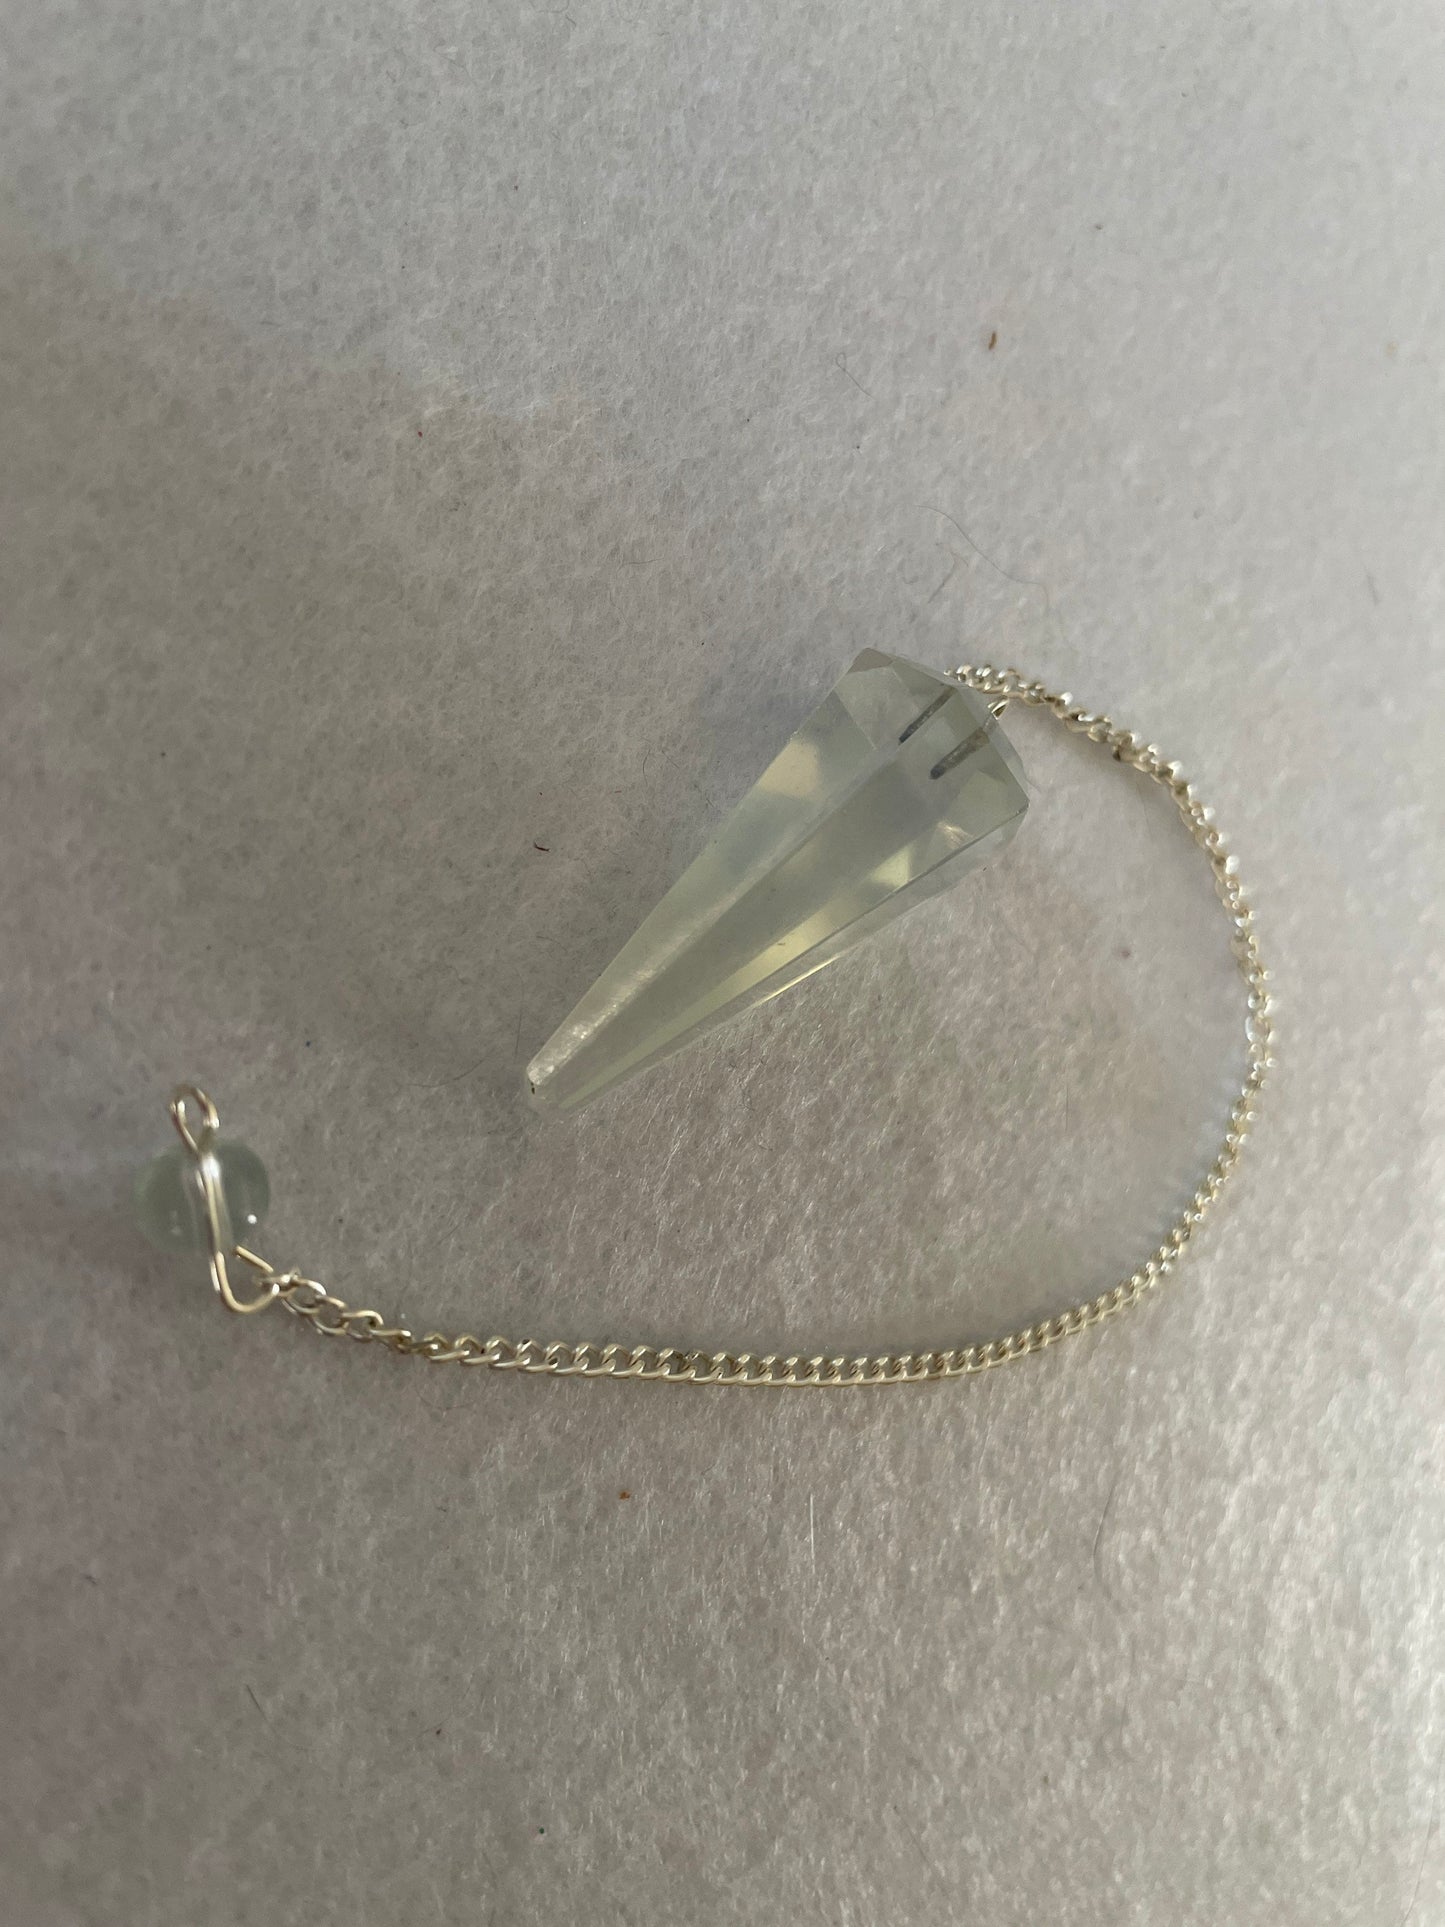 Beautiful Opalite pendulum is approximately 1.5” and with chain is 8.25” total length.